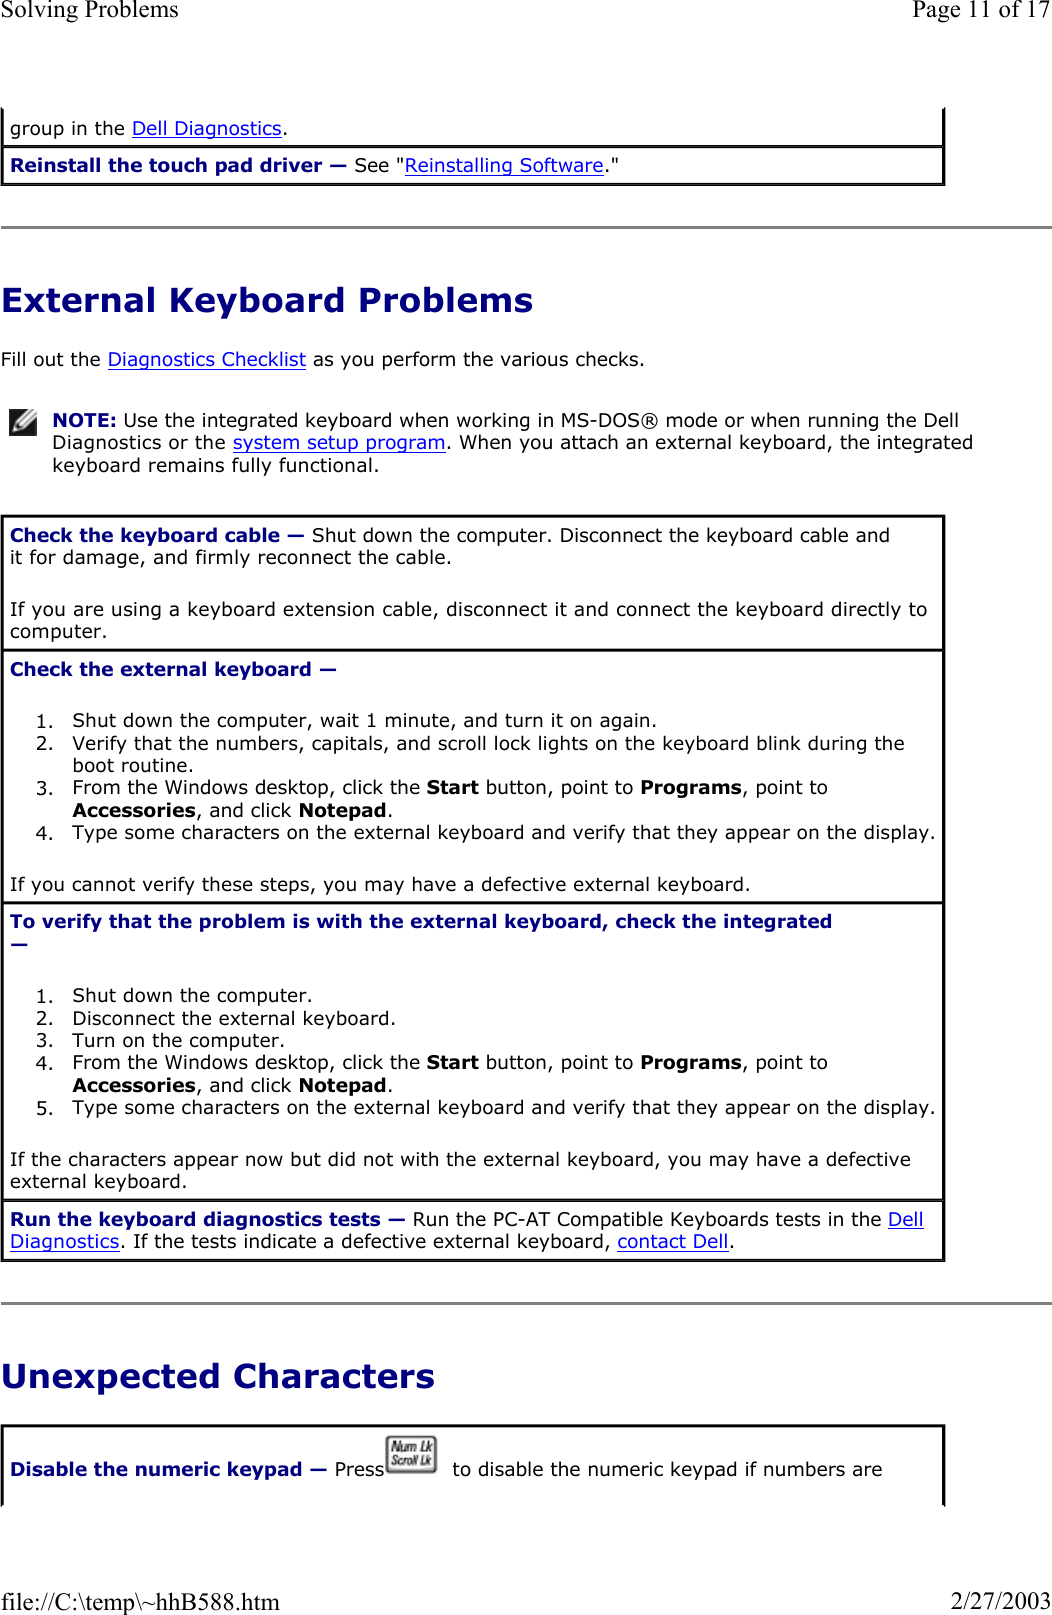 External Keyboard Problems Fill out the Diagnostics Checklist as you perform the various checks. Unexpected Characters group in the Dell Diagnostics.Reinstall the touch pad driver — See &quot;Reinstalling Software.&quot;NOTE: Use the integrated keyboard when working in MS-DOS® mode or when running the Dell Diagnostics or the system setup program. When you attach an external keyboard, the integrated keyboard remains fully functional.Check the keyboard cable — Shut down the computer. Disconnect the keyboard cable and it for damage, and firmly reconnect the cable. If you are using a keyboard extension cable, disconnect it and connect the keyboard directly to computer. Check the external keyboard —1. Shut down the computer, wait 1 minute, and turn it on again.  2. Verify that the numbers, capitals, and scroll lock lights on the keyboard blink during the boot routine.3. From the Windows desktop, click the Start button, point to Programs, point to Accessories, and click Notepad.4. Type some characters on the external keyboard and verify that they appear on the display. If you cannot verify these steps, you may have a defective external keyboard.  To verify that the problem is with the external keyboard, check the integrated —1. Shut down the computer.  2. Disconnect the external keyboard.  3. Turn on the computer.  4. From the Windows desktop, click the Start button, point to Programs, point to Accessories, and click Notepad.5. Type some characters on the external keyboard and verify that they appear on the display. If the characters appear now but did not with the external keyboard, you may have a defective external keyboard.  Run the keyboard diagnostics tests — Run the PC-AT Compatible Keyboards tests in the Dell Diagnostics. If the tests indicate a defective external keyboard, contact Dell.Disable the numeric keypad — Press   to disable the numeric keypad if numbers are Page 11 of 17Solving Problems2/27/2003file://C:\temp\~hhB588.htm